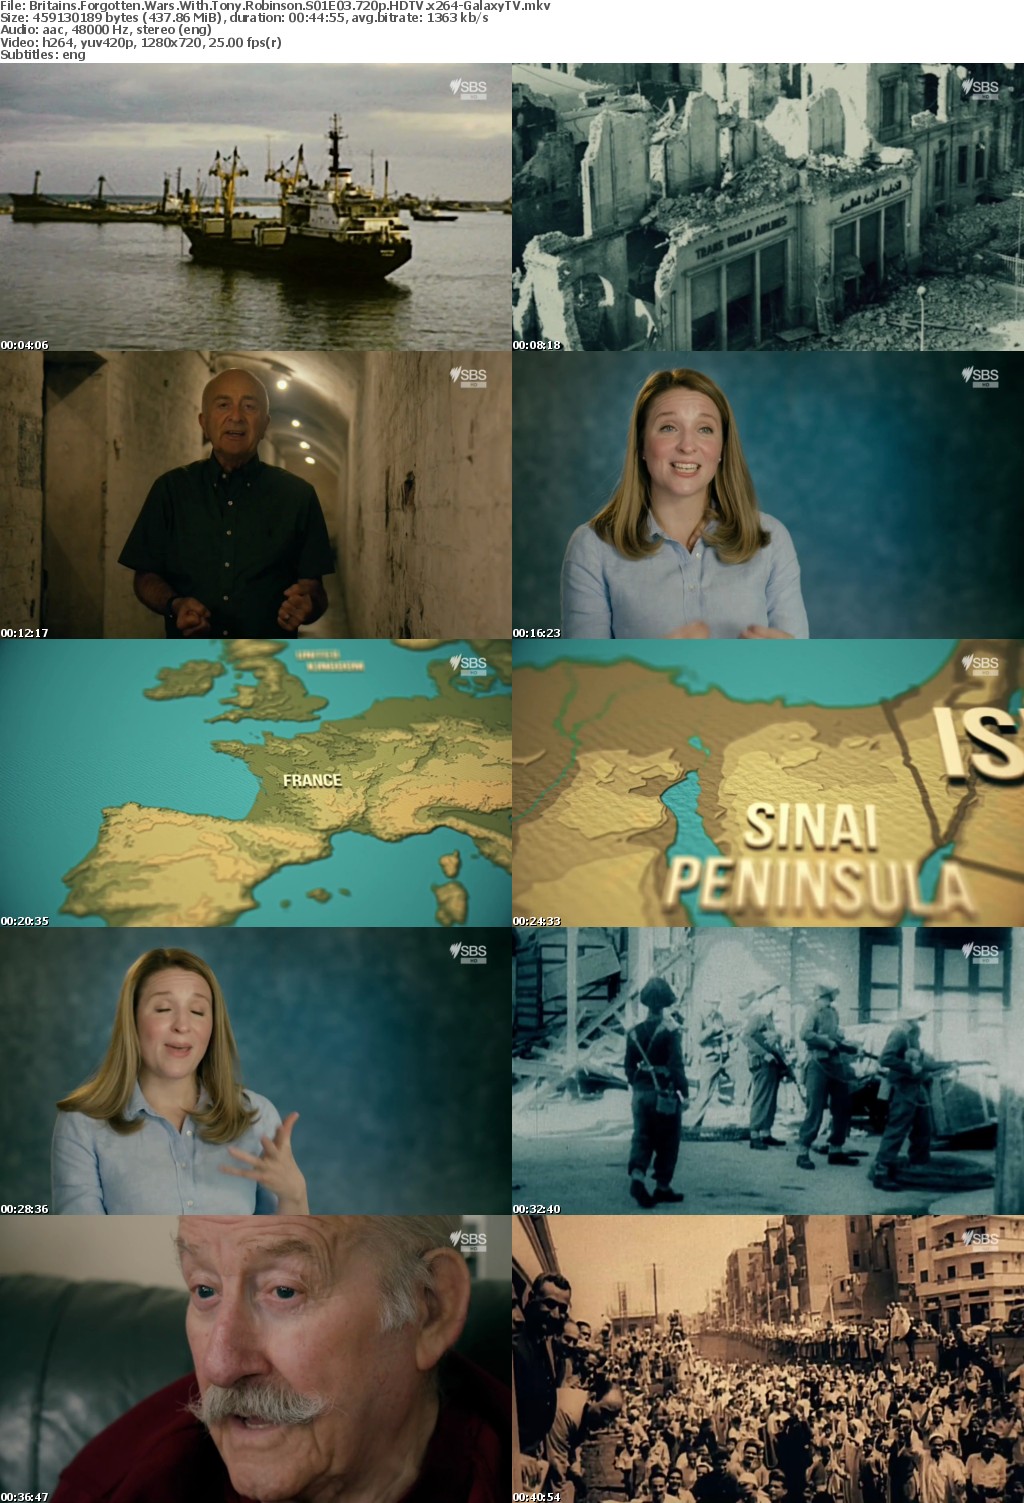 Britains Forgotten Wars With Tony Robinson S01 COMPLETE 720p HDTV x264-GalaxyTV